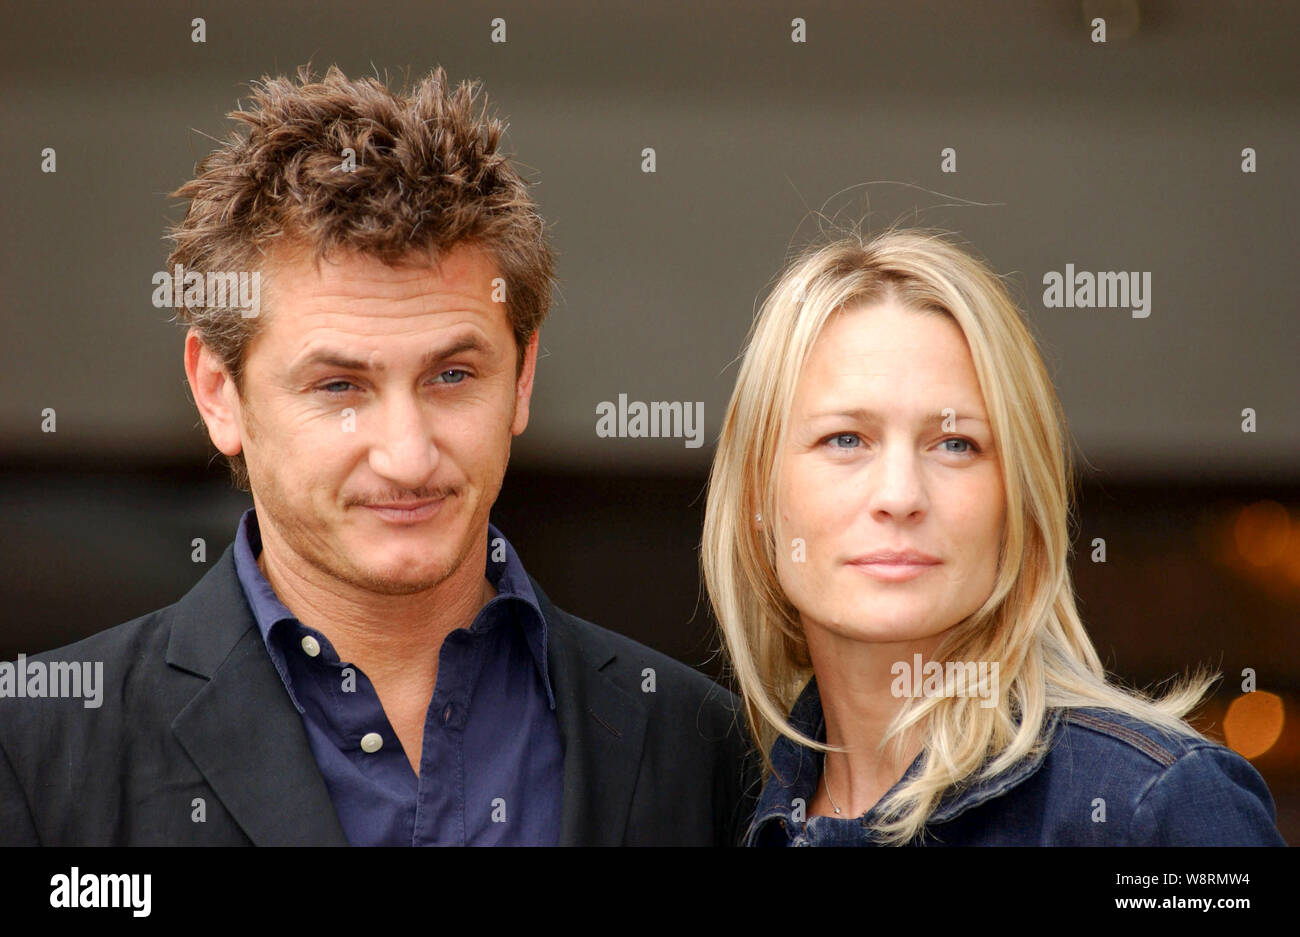 Sean Penn and his wife Robin Wright-Penn pictured at The Sheraton Grand  Hotel, Edinburgh today ( Thursday 23/8/01). His new film "The Pledge" is  being premiered tonight at the cities UGC cinema